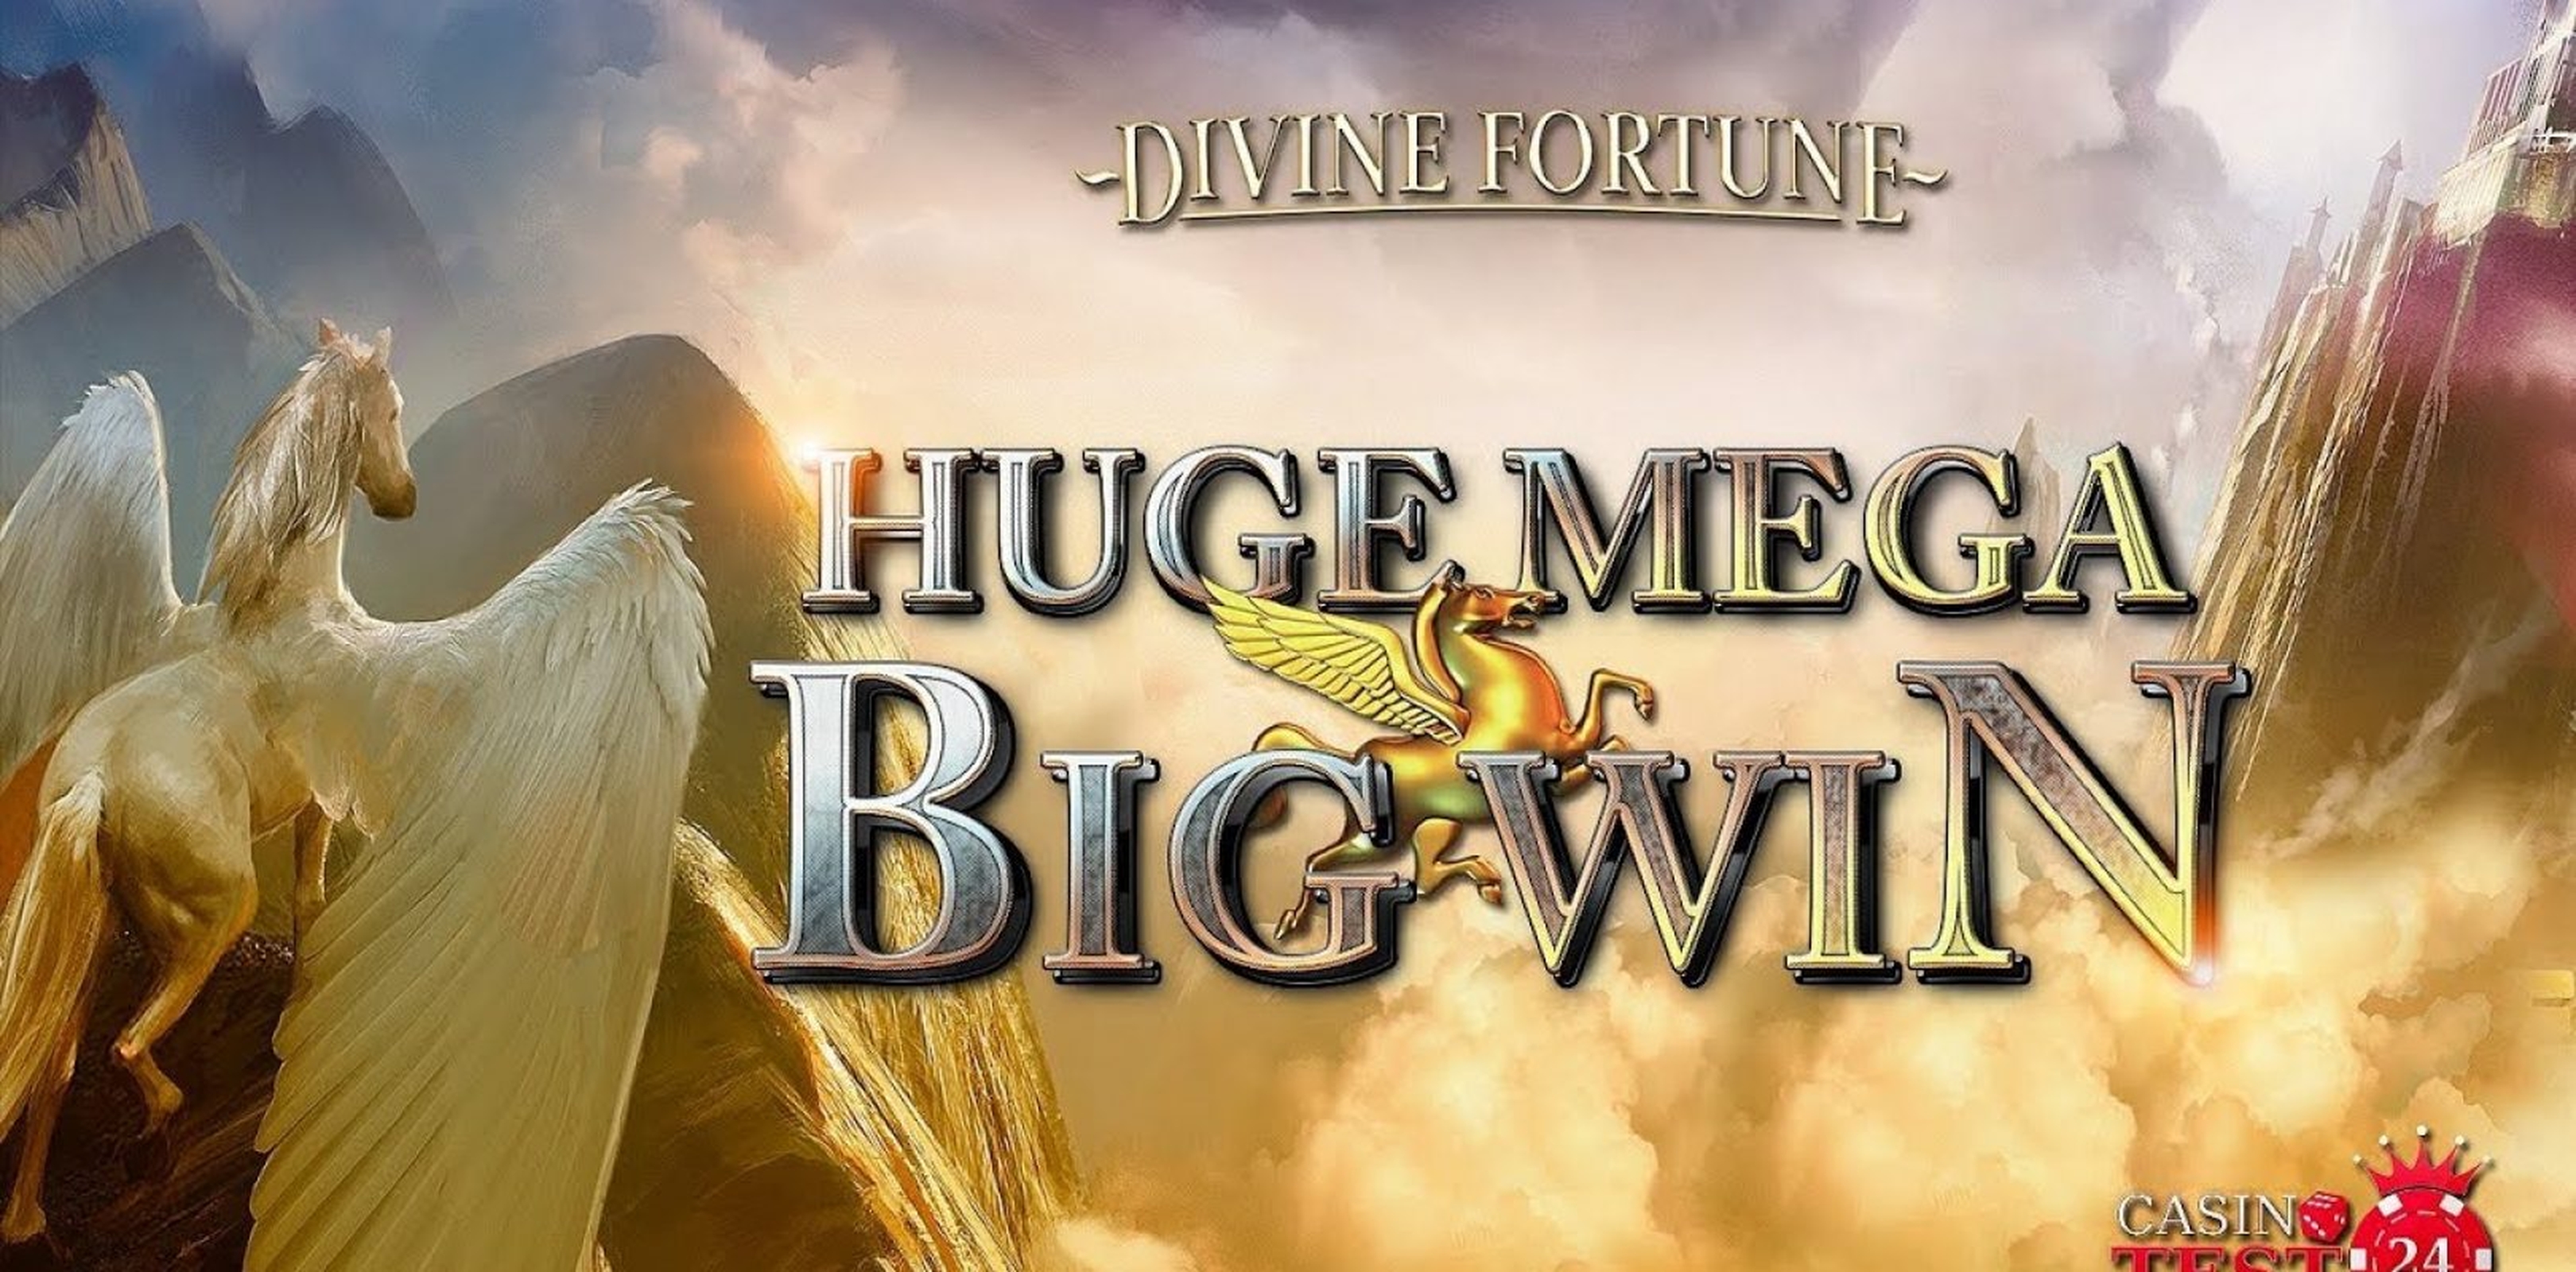 The Divine Fortune Online Slot Demo Game by NetEnt